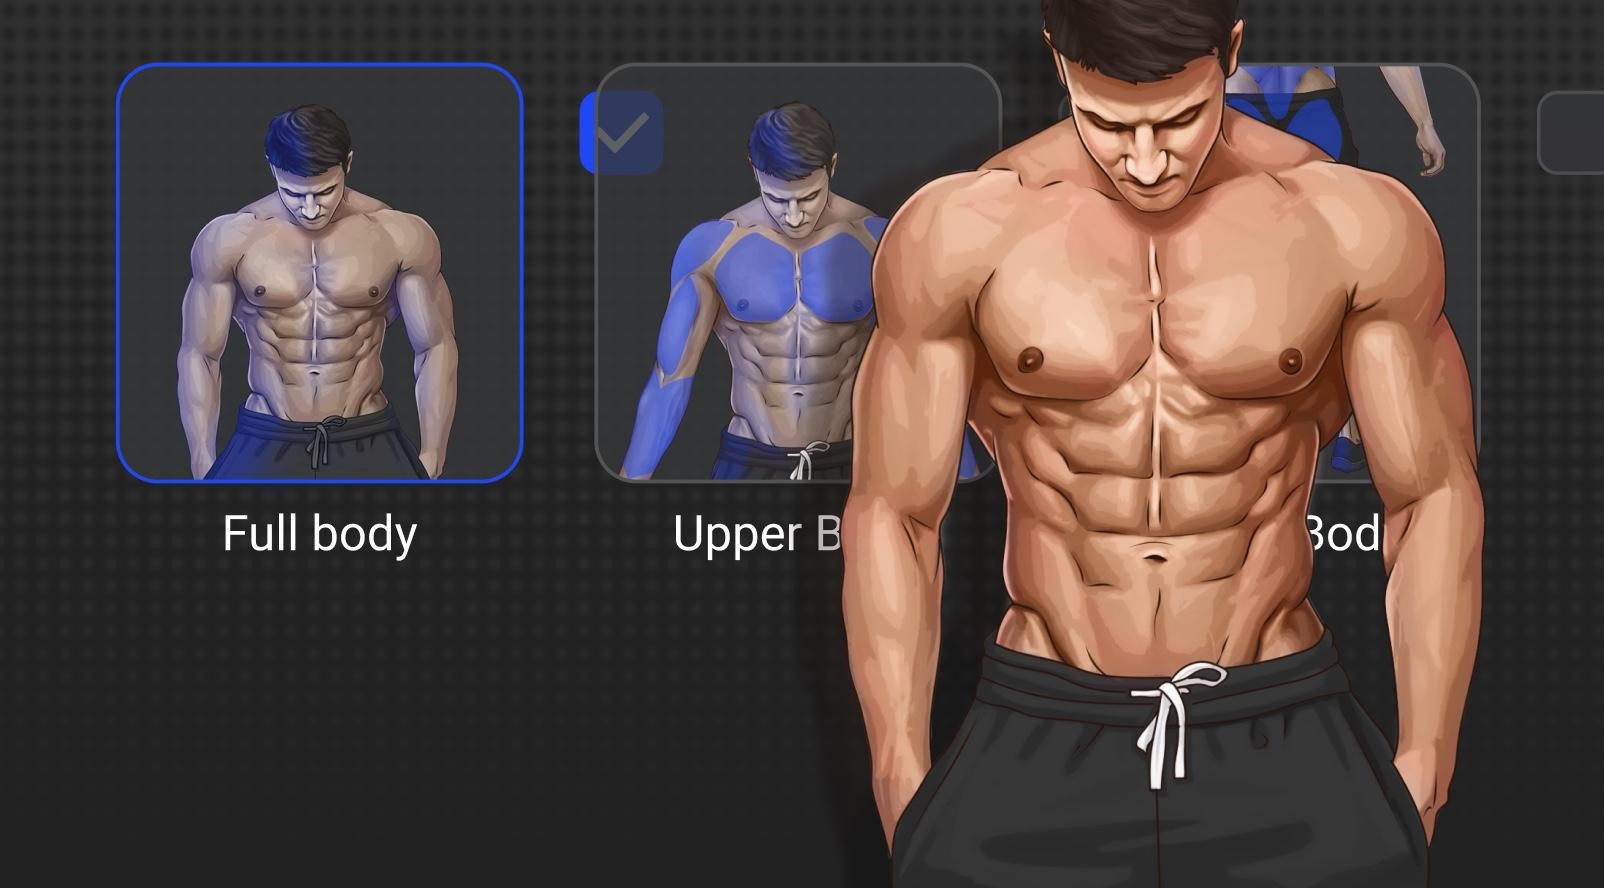 Muscle Booster: A Great Opportunity to Get Your Muscles in Shape - imei.info पर समाचार इमेजेज